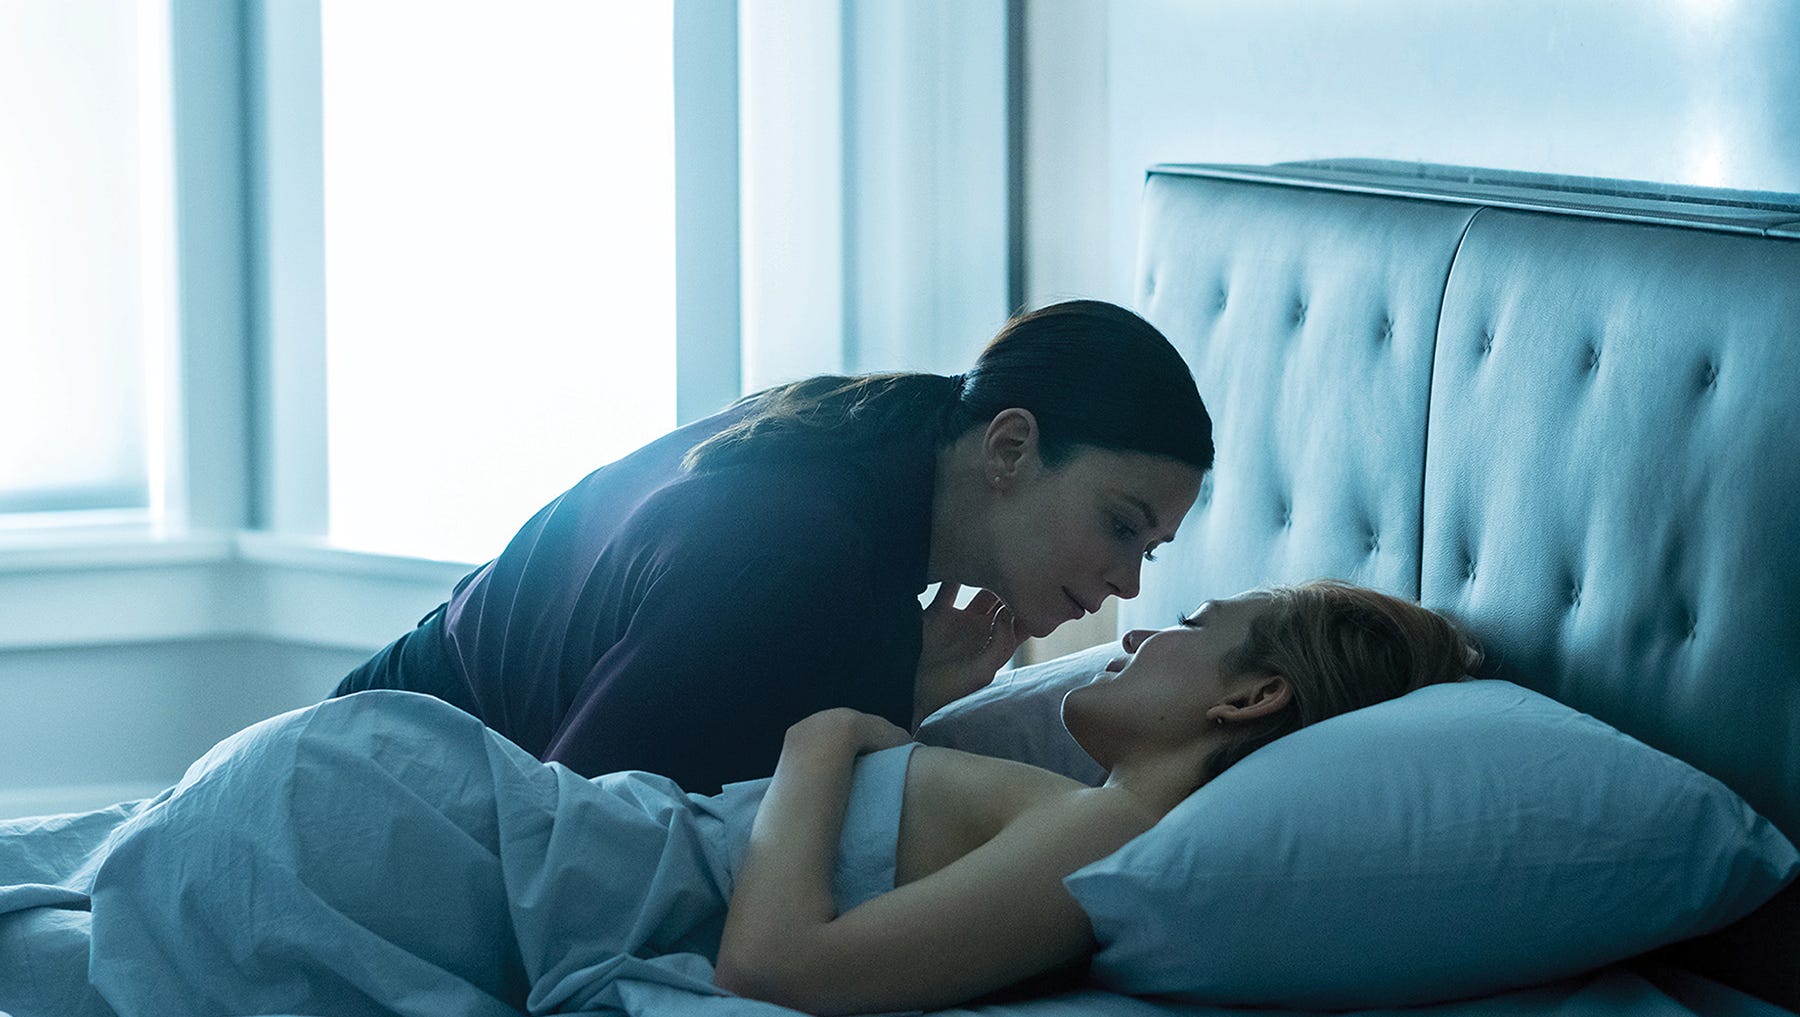 Starz is ready for two new 'Girlfriend' experiences.